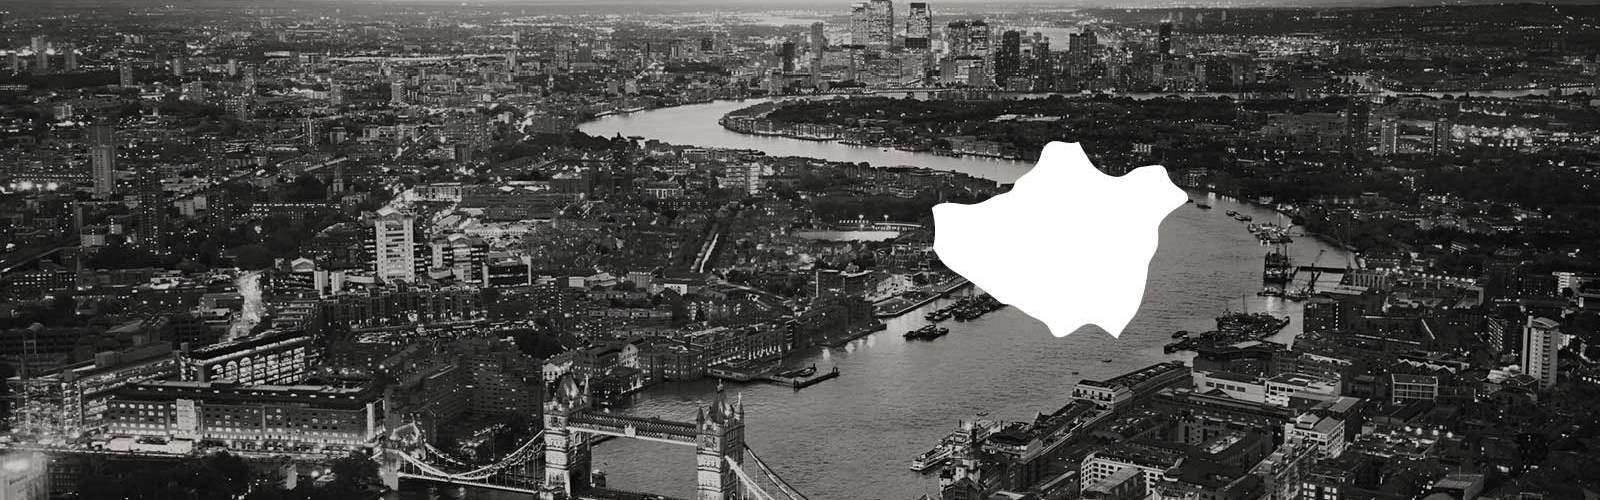 Photo of the Thames with a white map of London